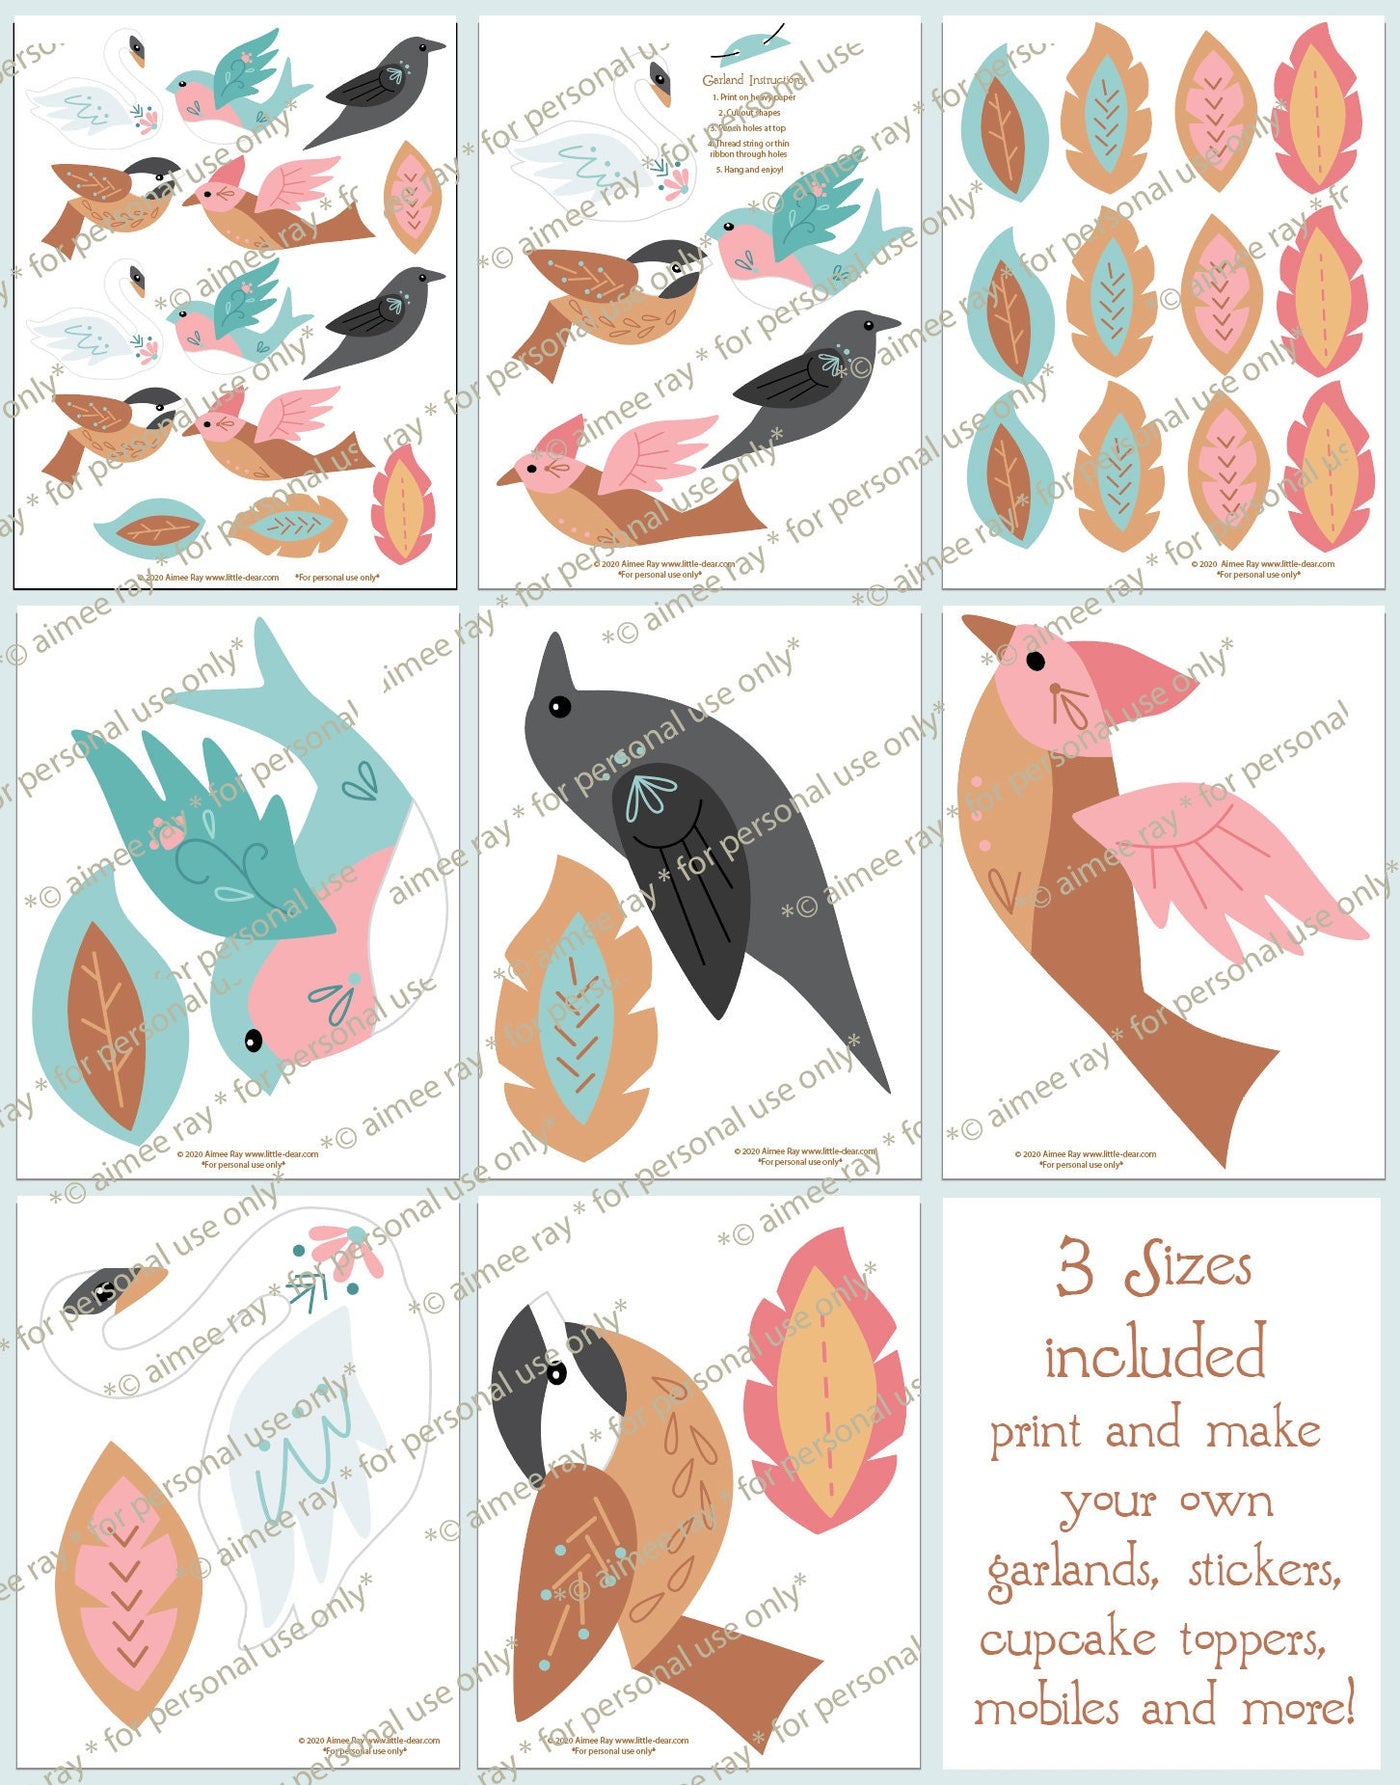 Birds and Feathers printable/ SVG download for garlands, stickers, party